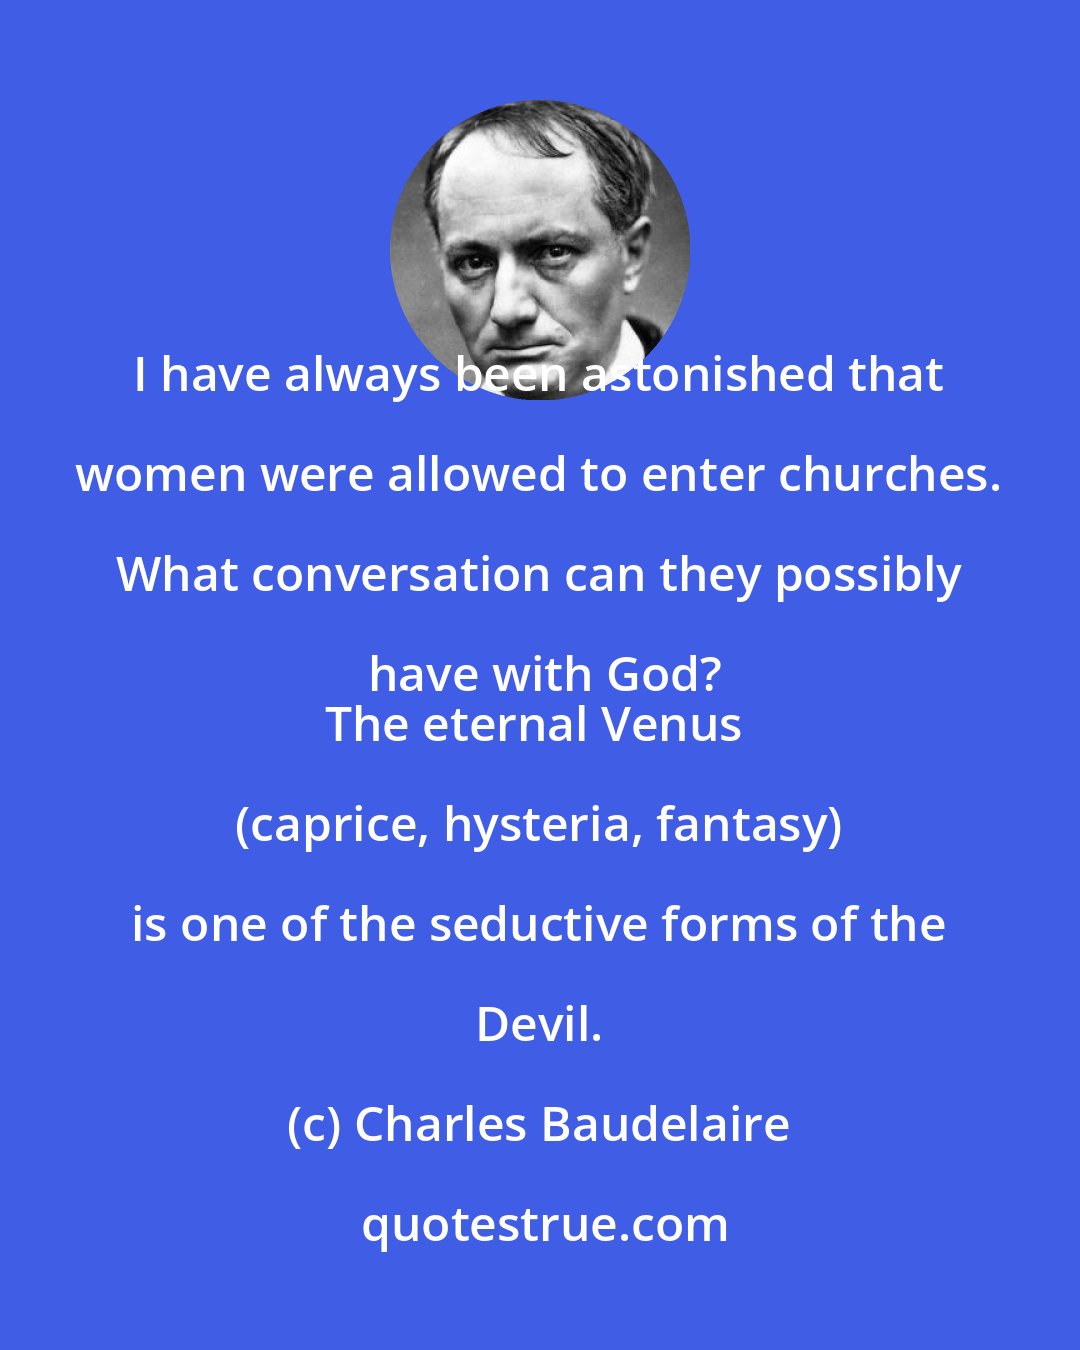 Charles Baudelaire: I have always been astonished that women were allowed to enter churches. What conversation can they possibly have with God?
The eternal Venus (caprice, hysteria, fantasy) is one of the seductive forms of the Devil.